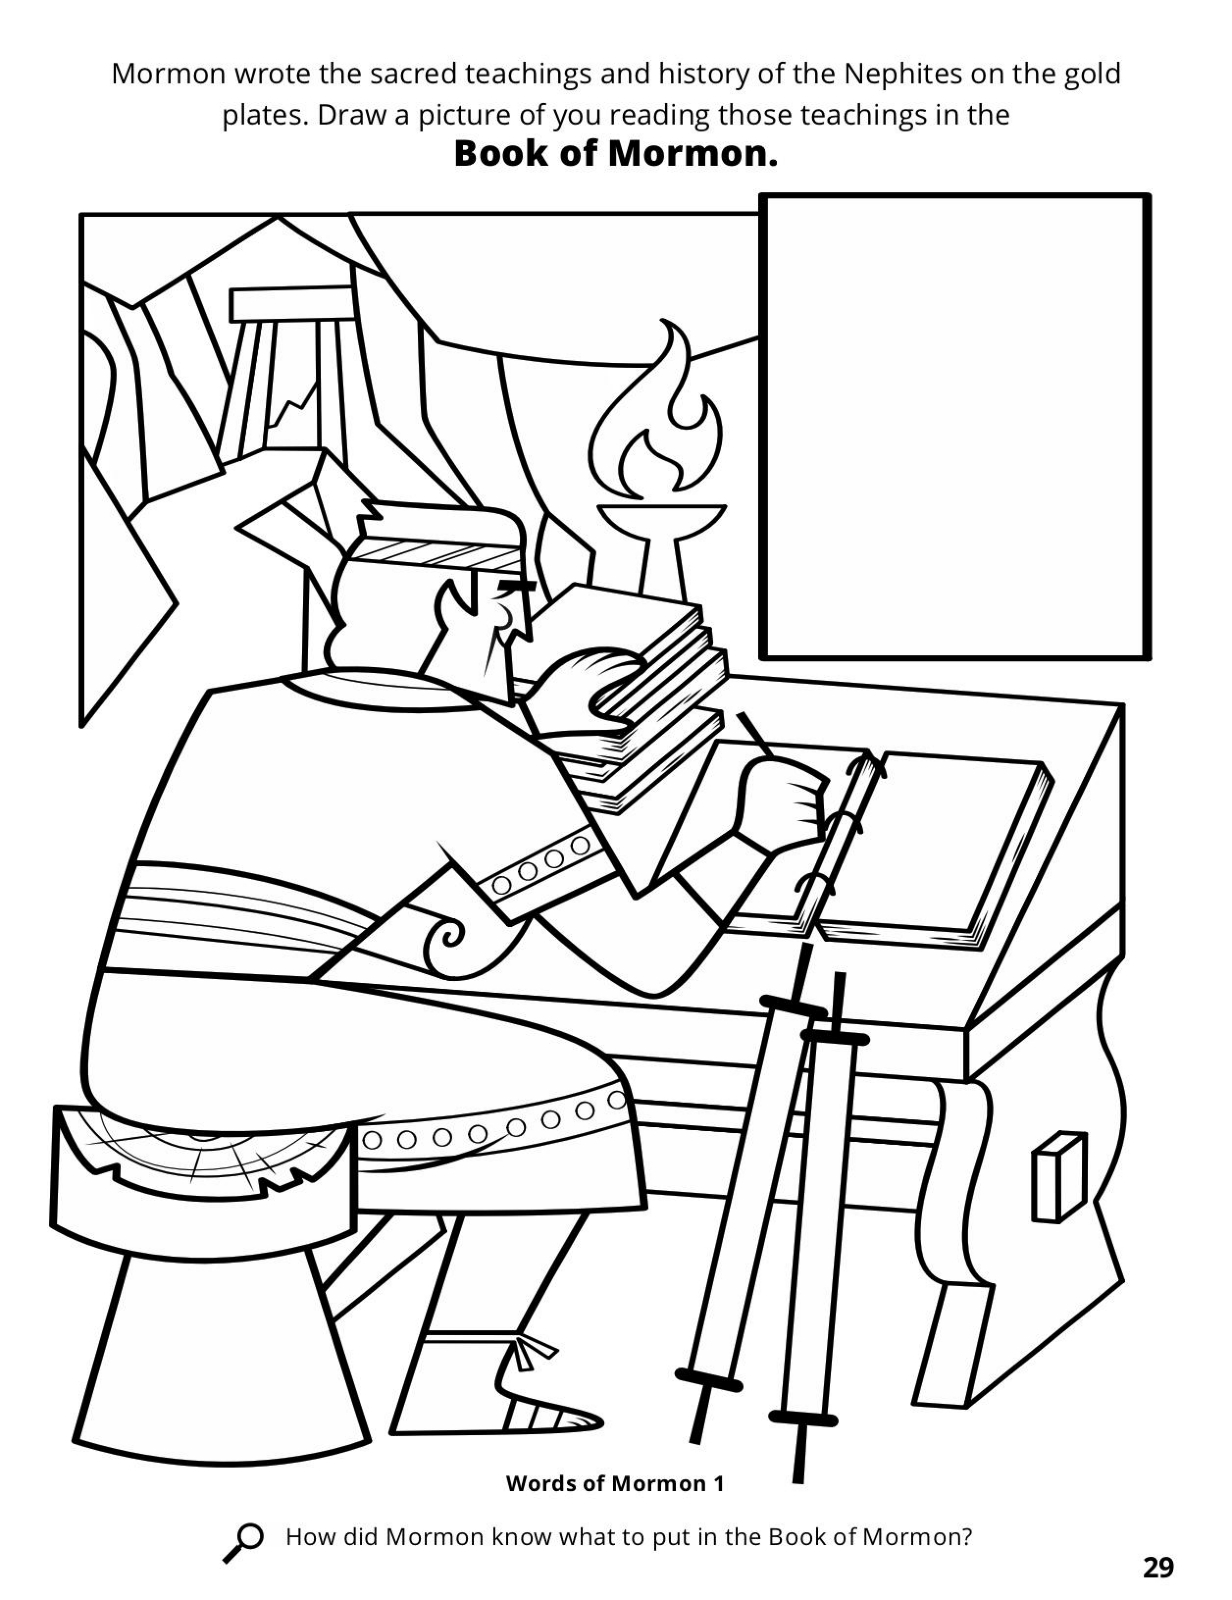 Nephi Coloring Page at GetColorings.com | Free printable colorings